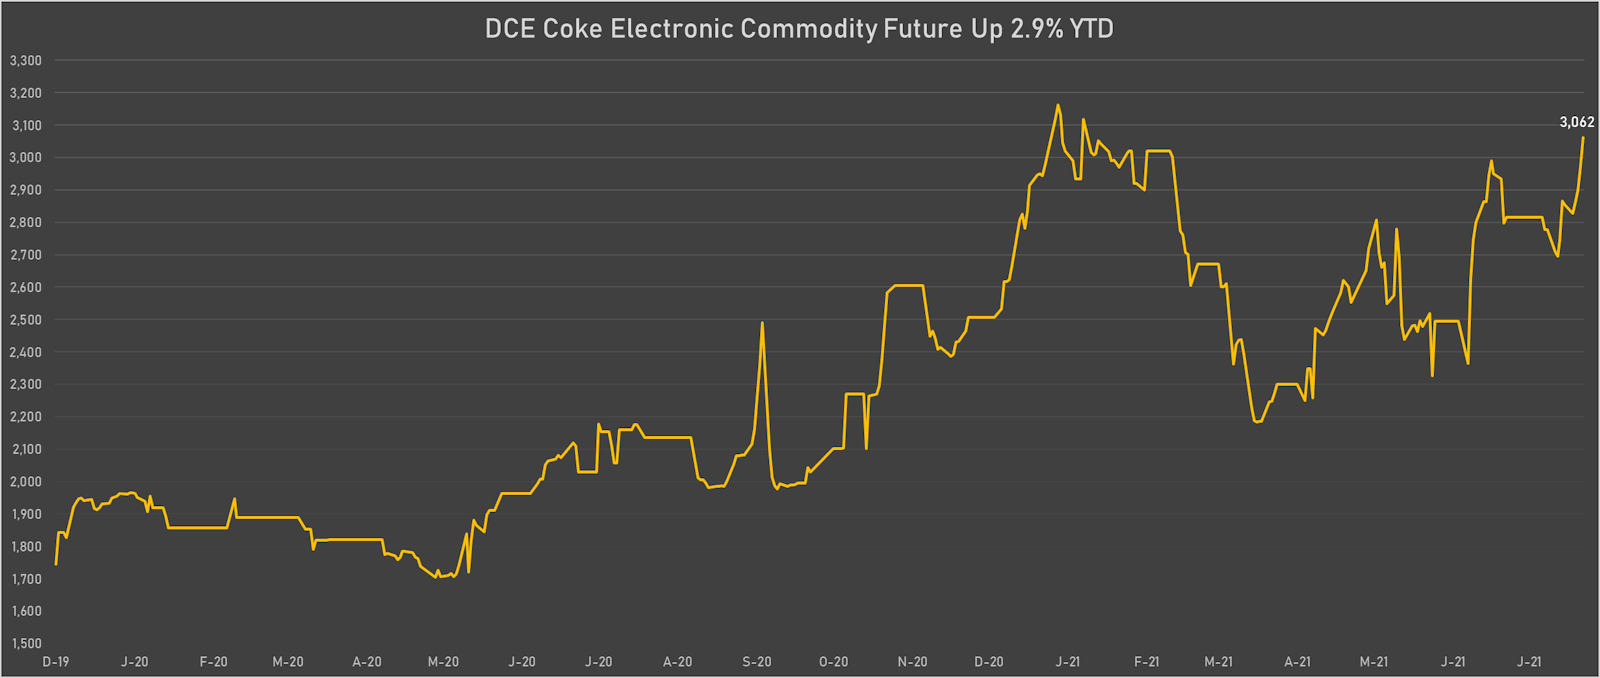 Coke rose sharply this week on the Dalian Commodity Exchange | Sources: ϕpost, Refinitiv data